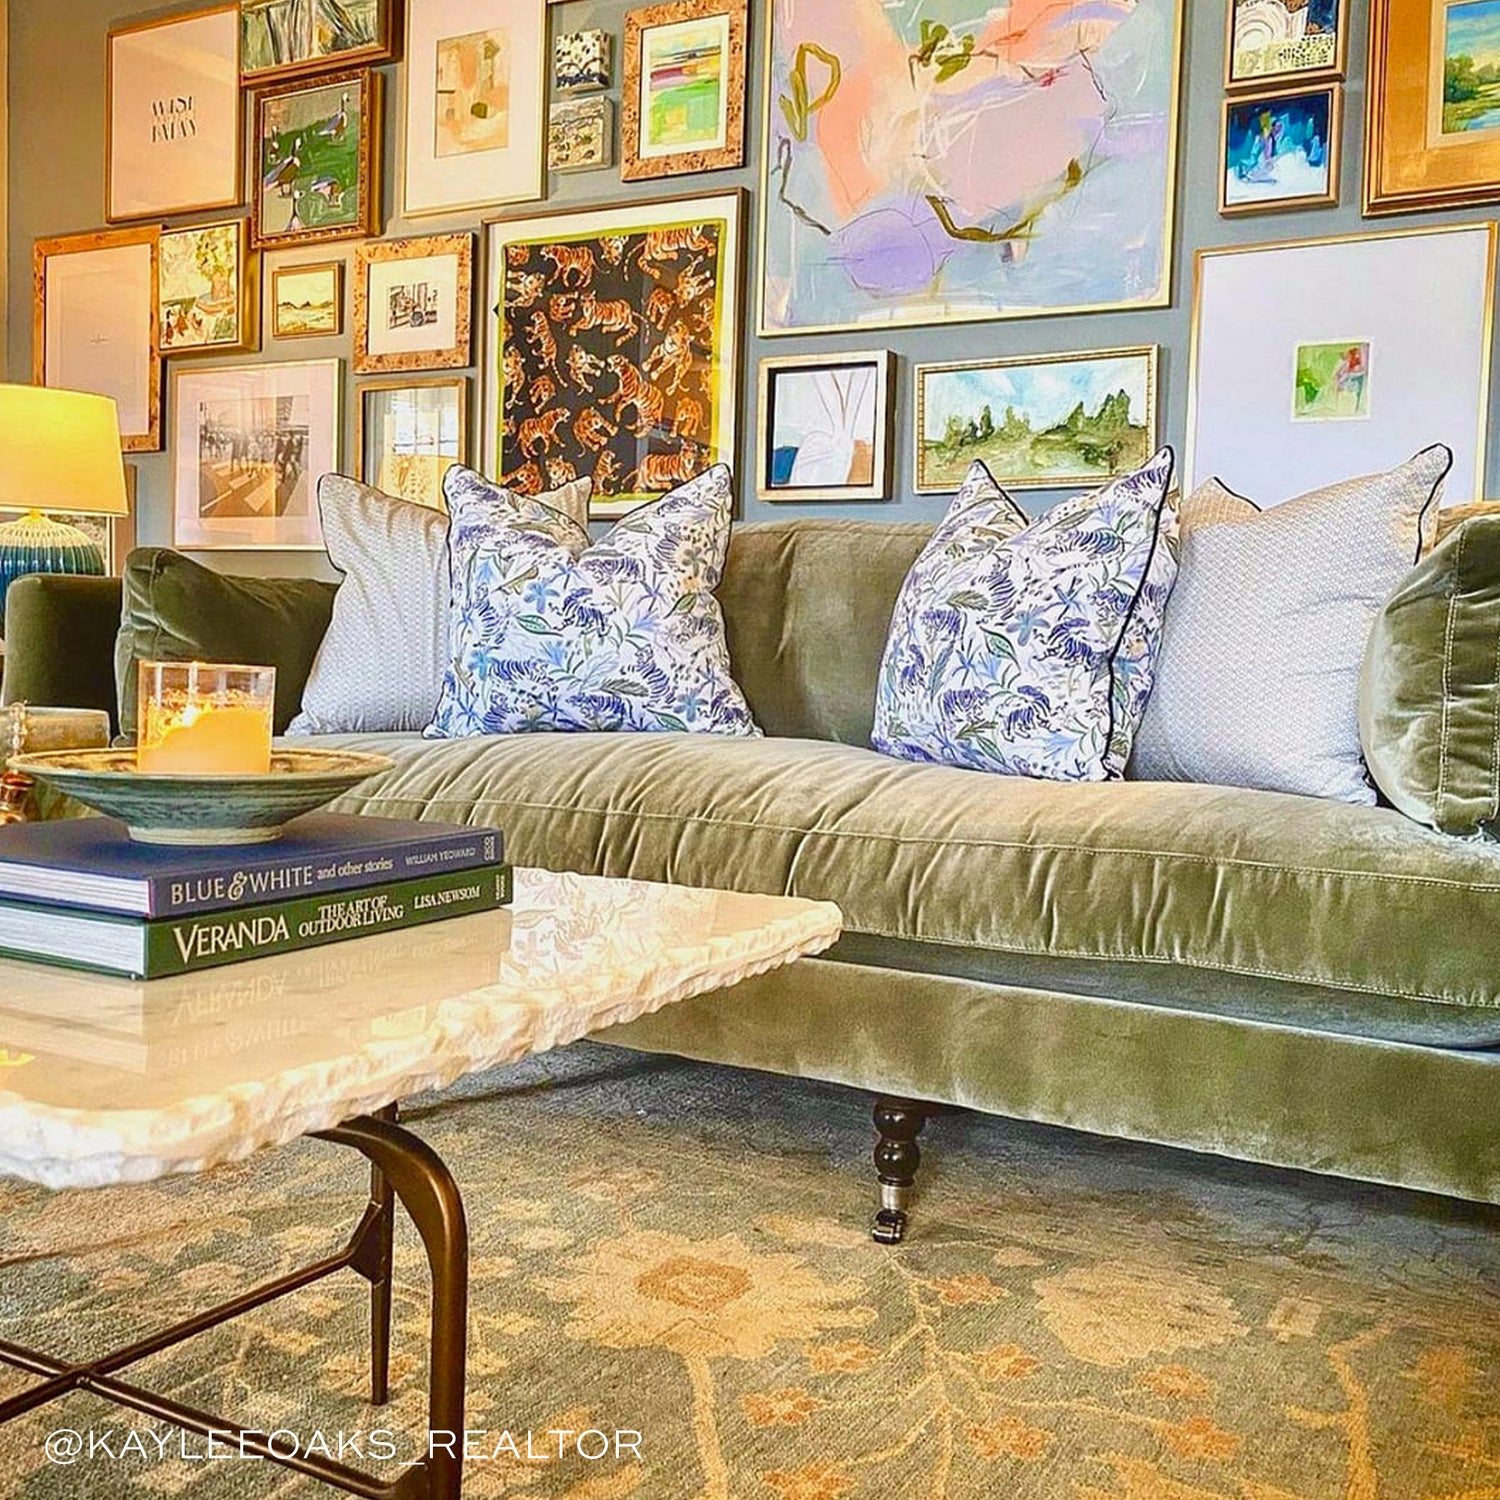 Living room full with artwork on wall styled with two Green Tiger Printed Pillows facing each other and two Moss Green Geometric Printed Pillows on Green Velvet Couch next to cream table with candle on plate on two stacked books. Photo taken by Kaylee Oaks